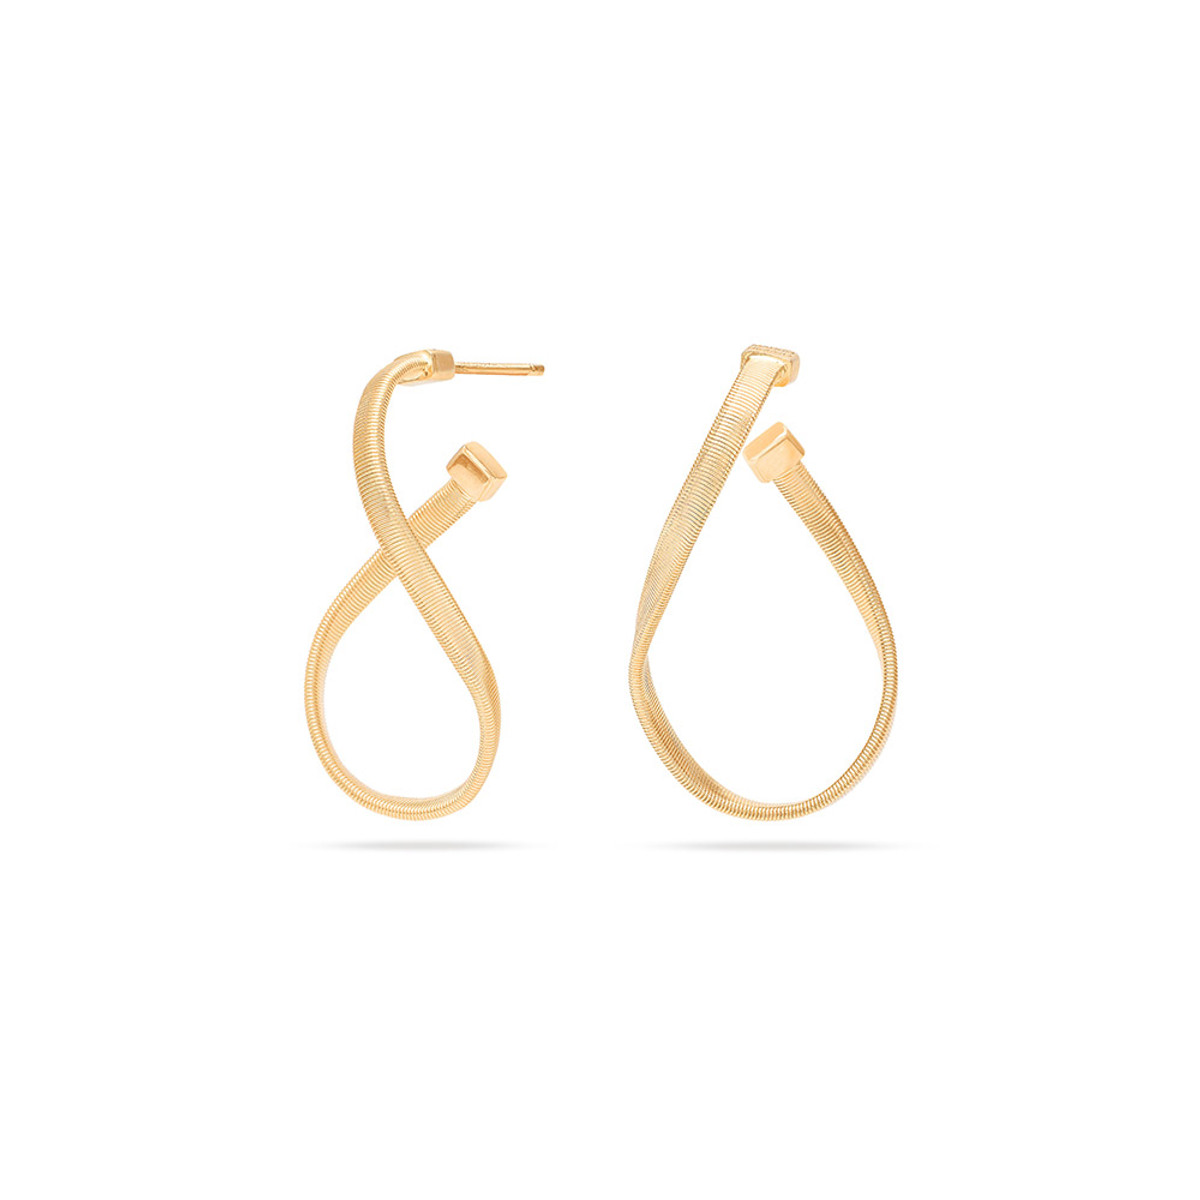 Marco Bicego Marrakech Collection 18K Yellow Gold Large Hand Twisted Earrings-54248 Product Image